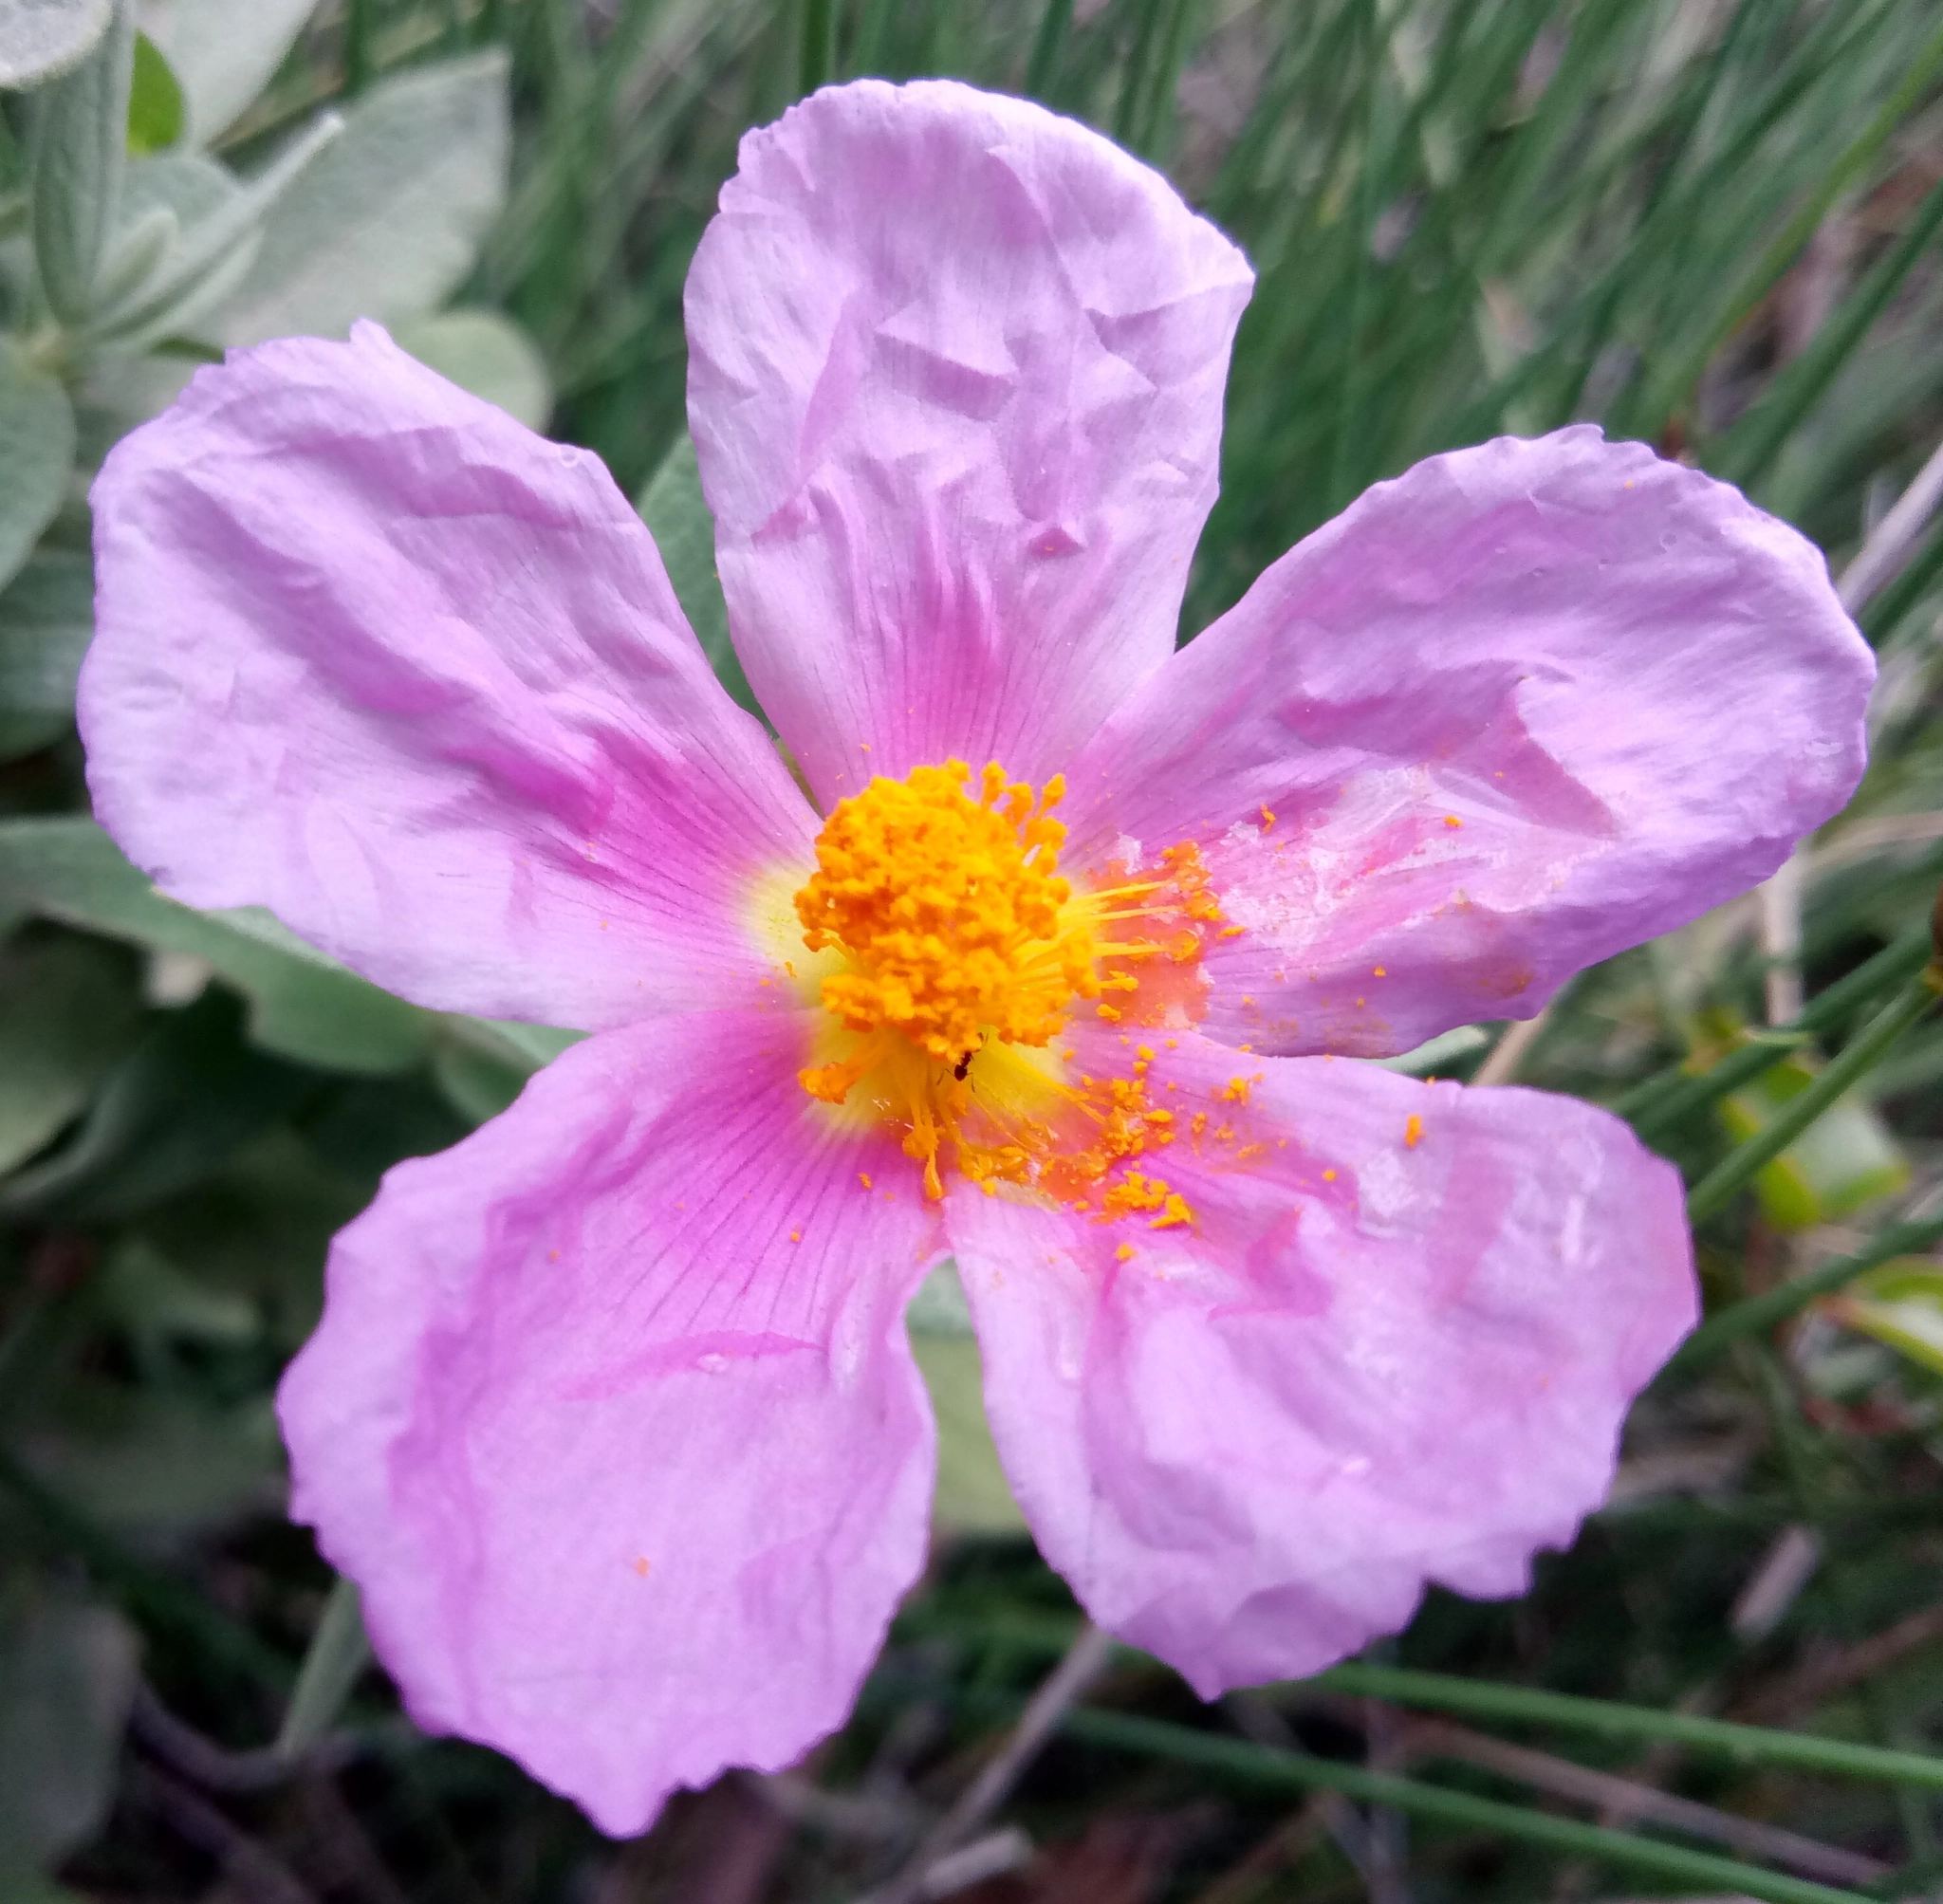 Meizu m3 note sample photo. Pink flower photography